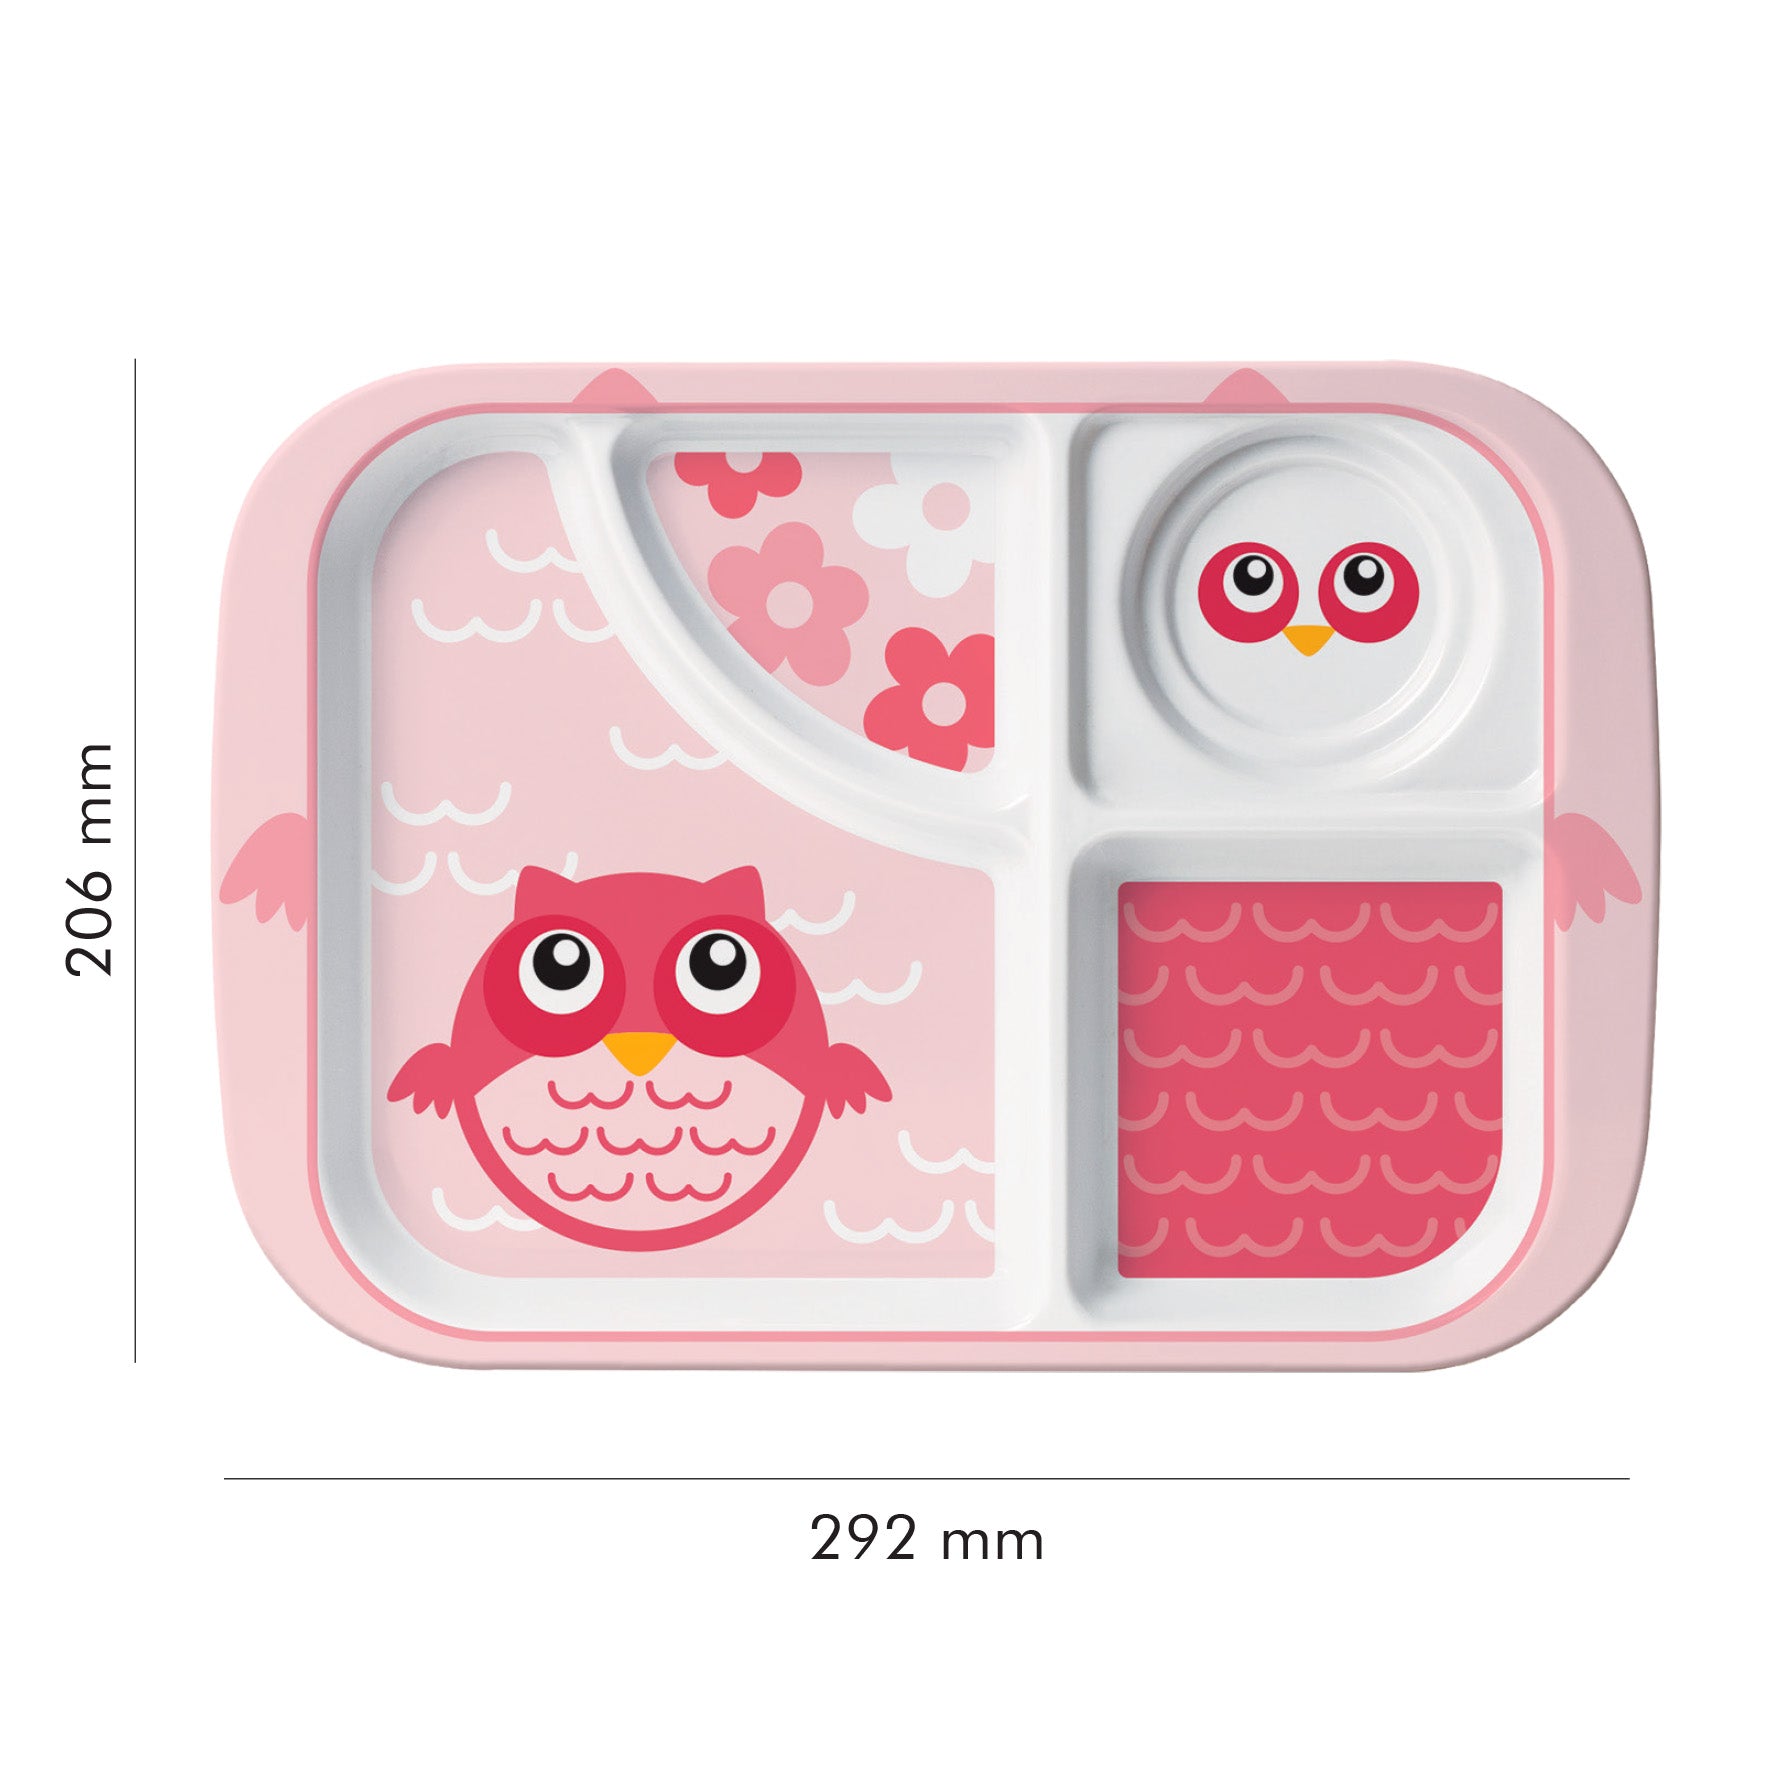 The Plate Story - Children Melamine Plate - 4 Compartment Plate 11.5"- Owl (Set of 1)